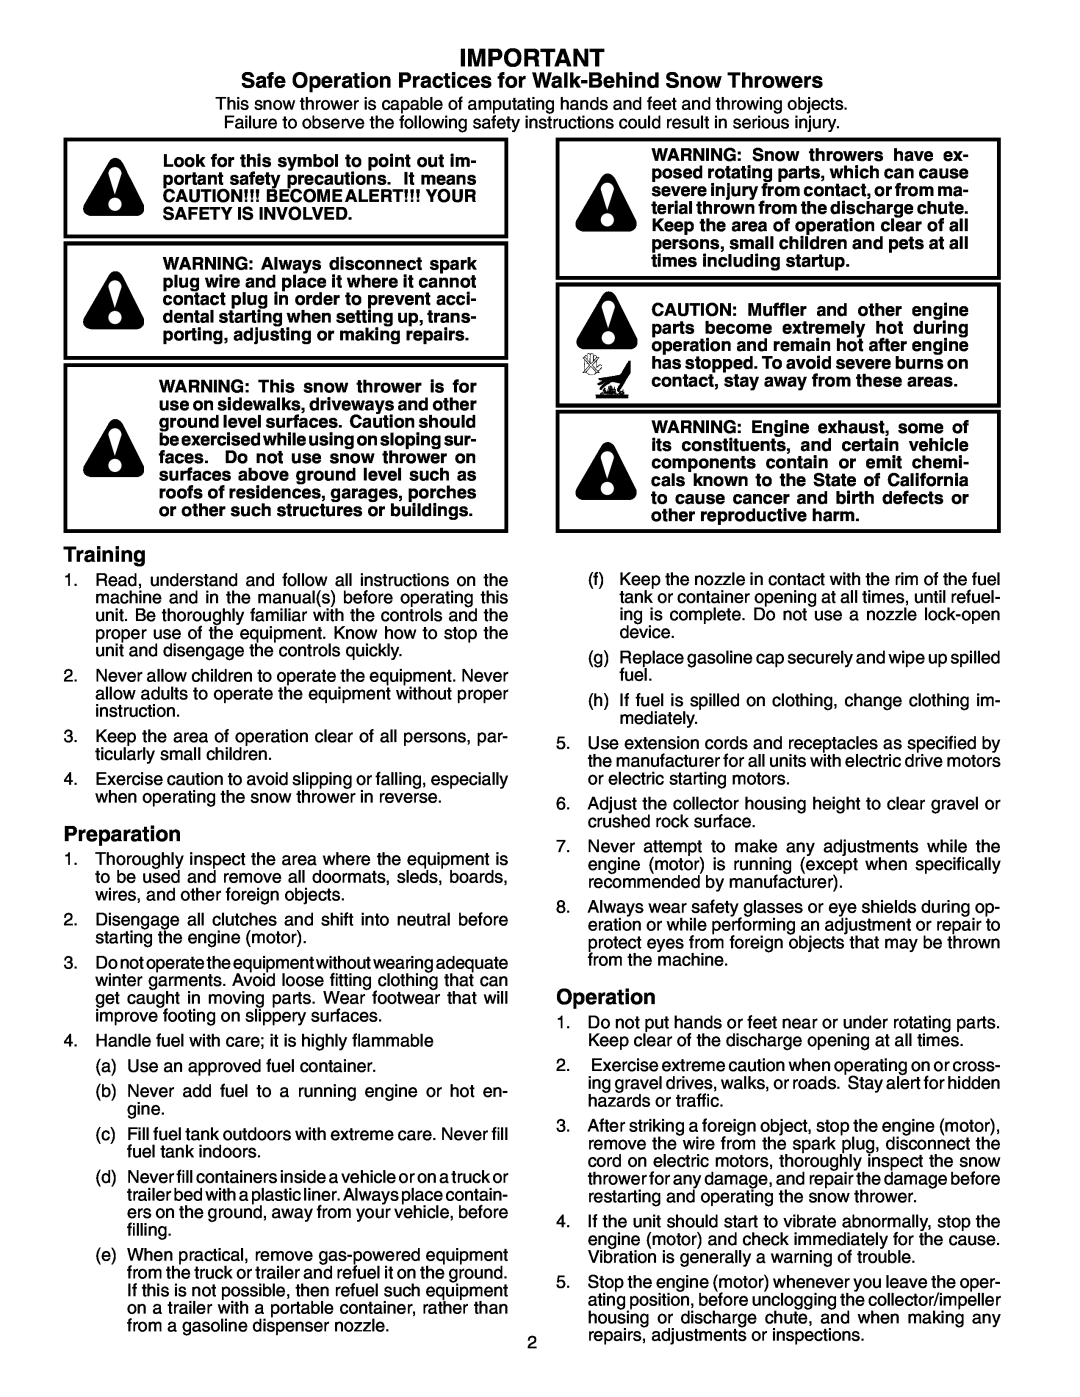 Poulan 961970004 owner manual Safe Operation Practices for Walk-Behind Snow Throwers, Training, Preparation 